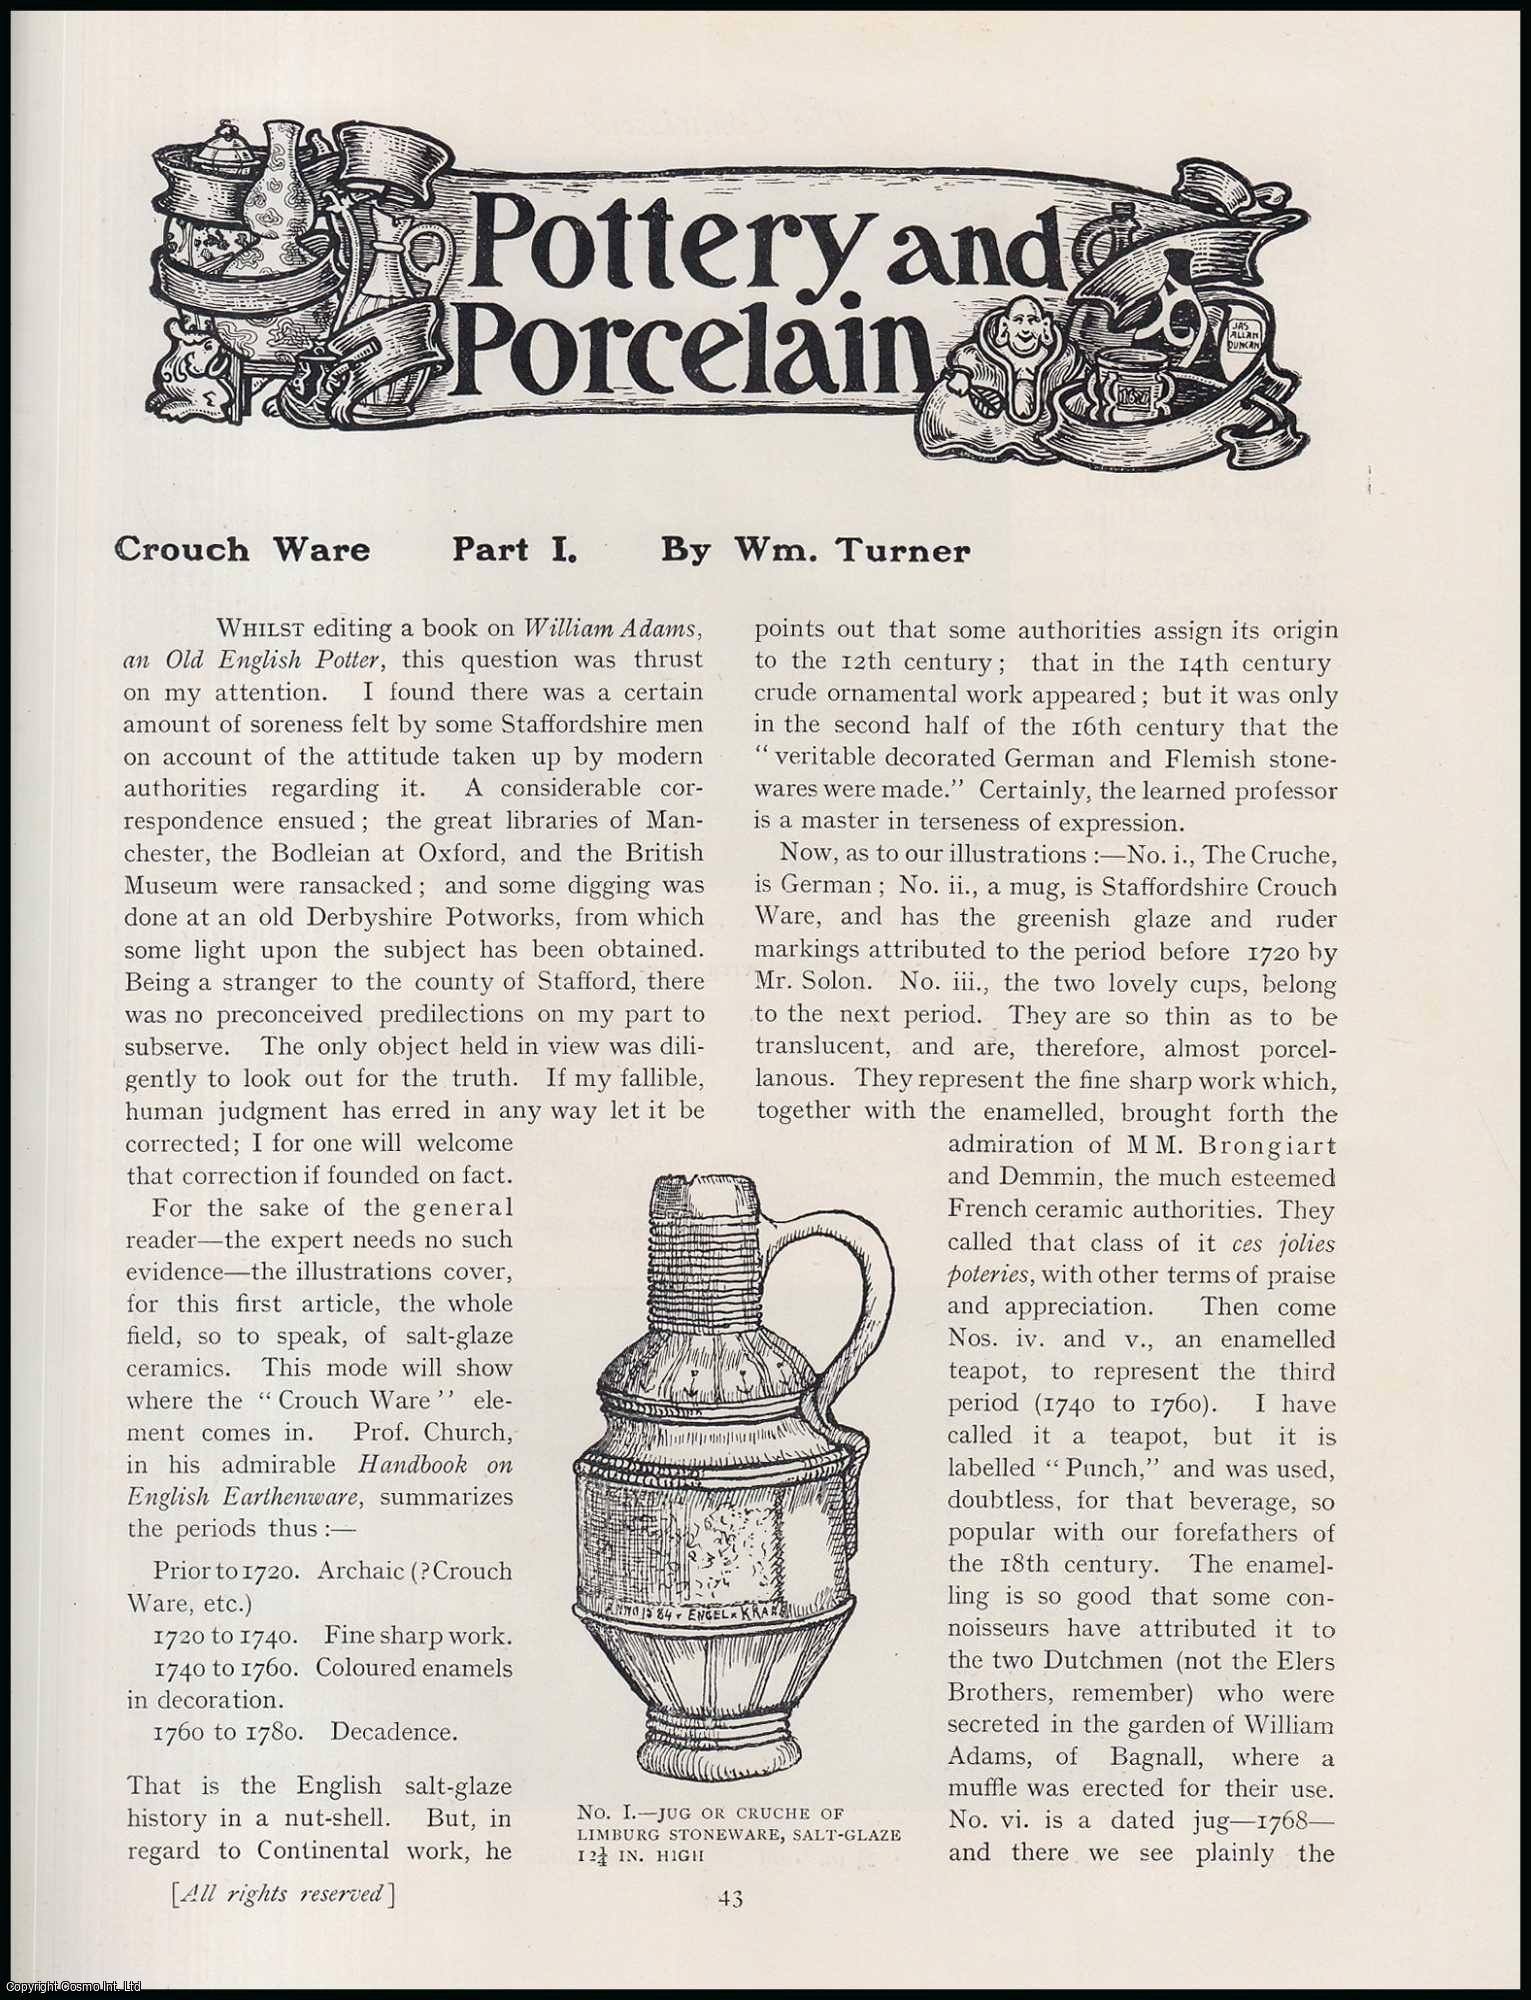 William Turner - Crouch Ware, Pottery & Porcelain (part 1). An original article from The Connoisseur, 1905.